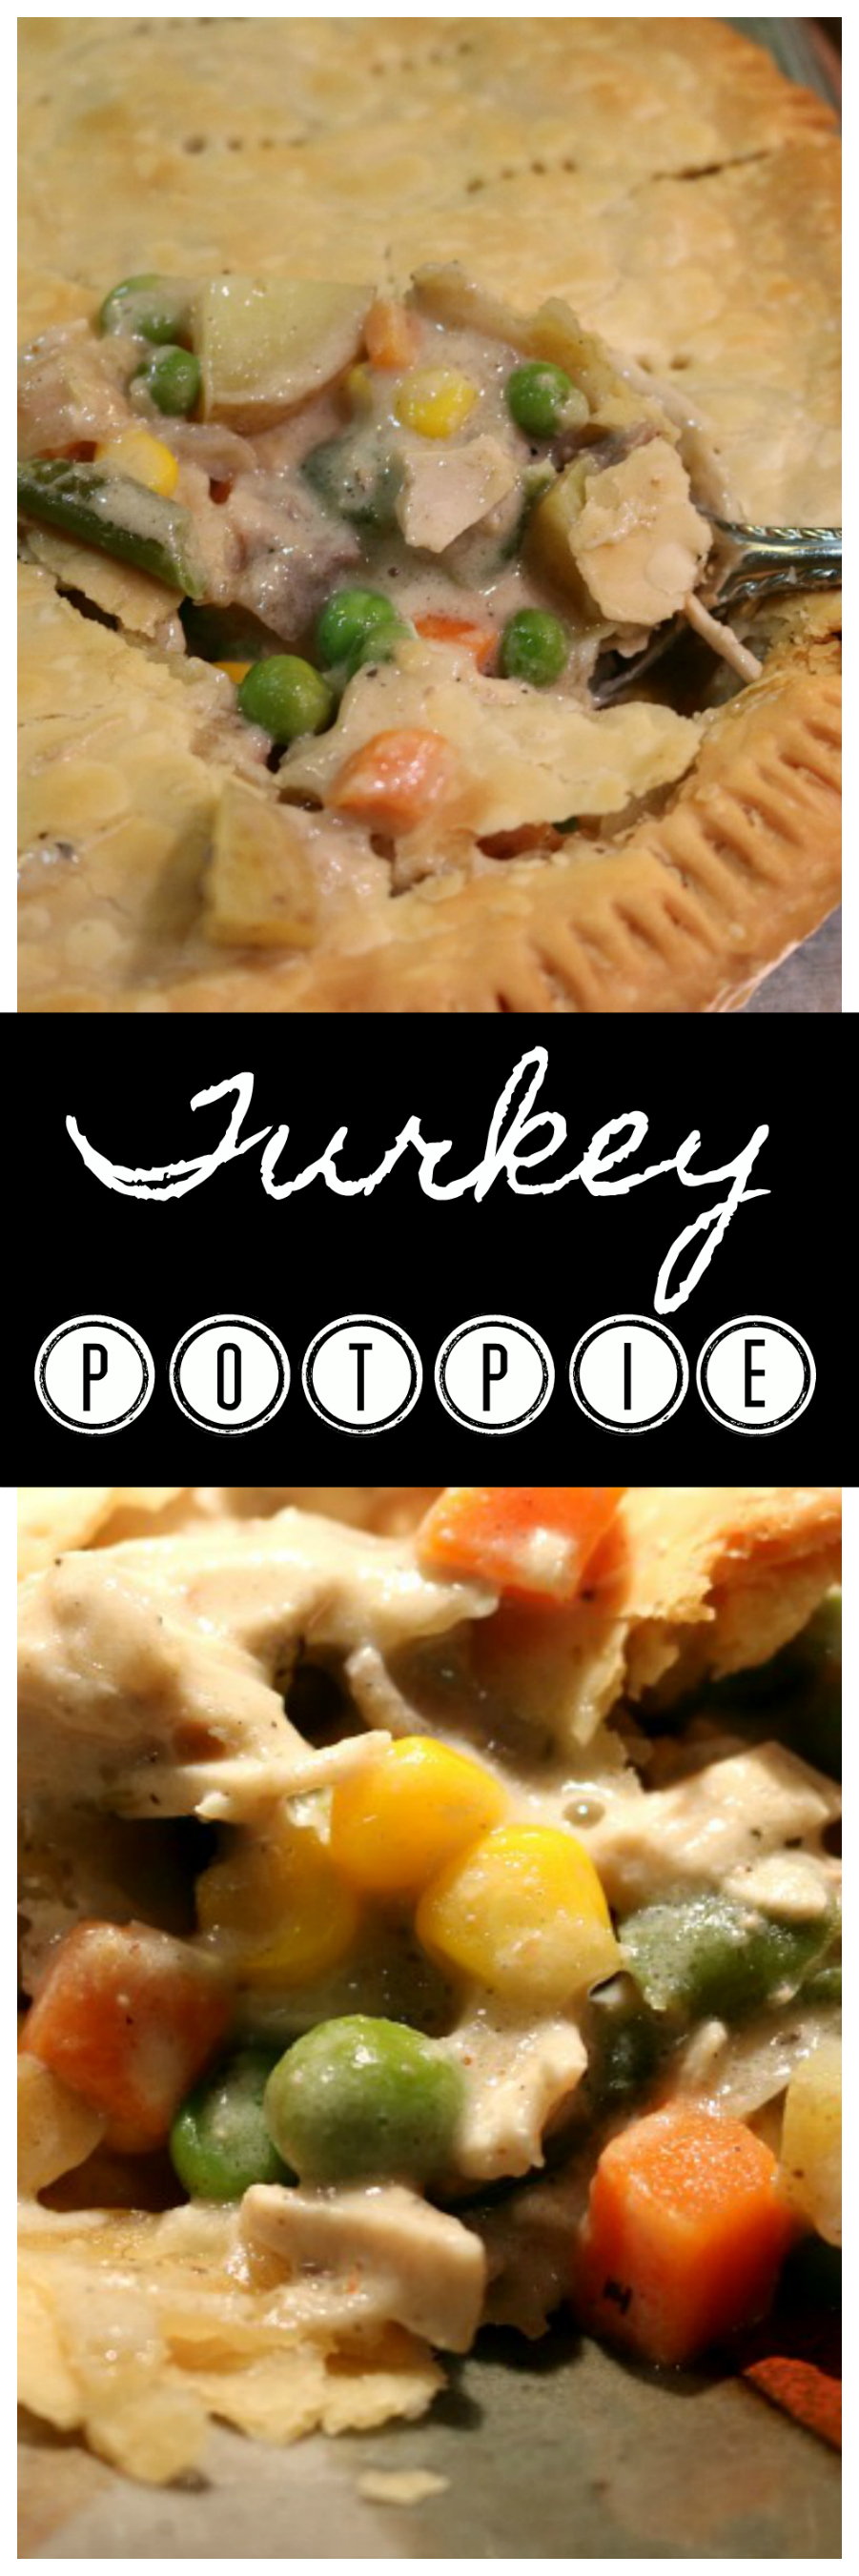 Thanksgiving Leftovers - Make this delicious Turkey Pot Pie simple substitute the chicken with turkey. | CeceliasGoodStuff.com | Good Food for Good People